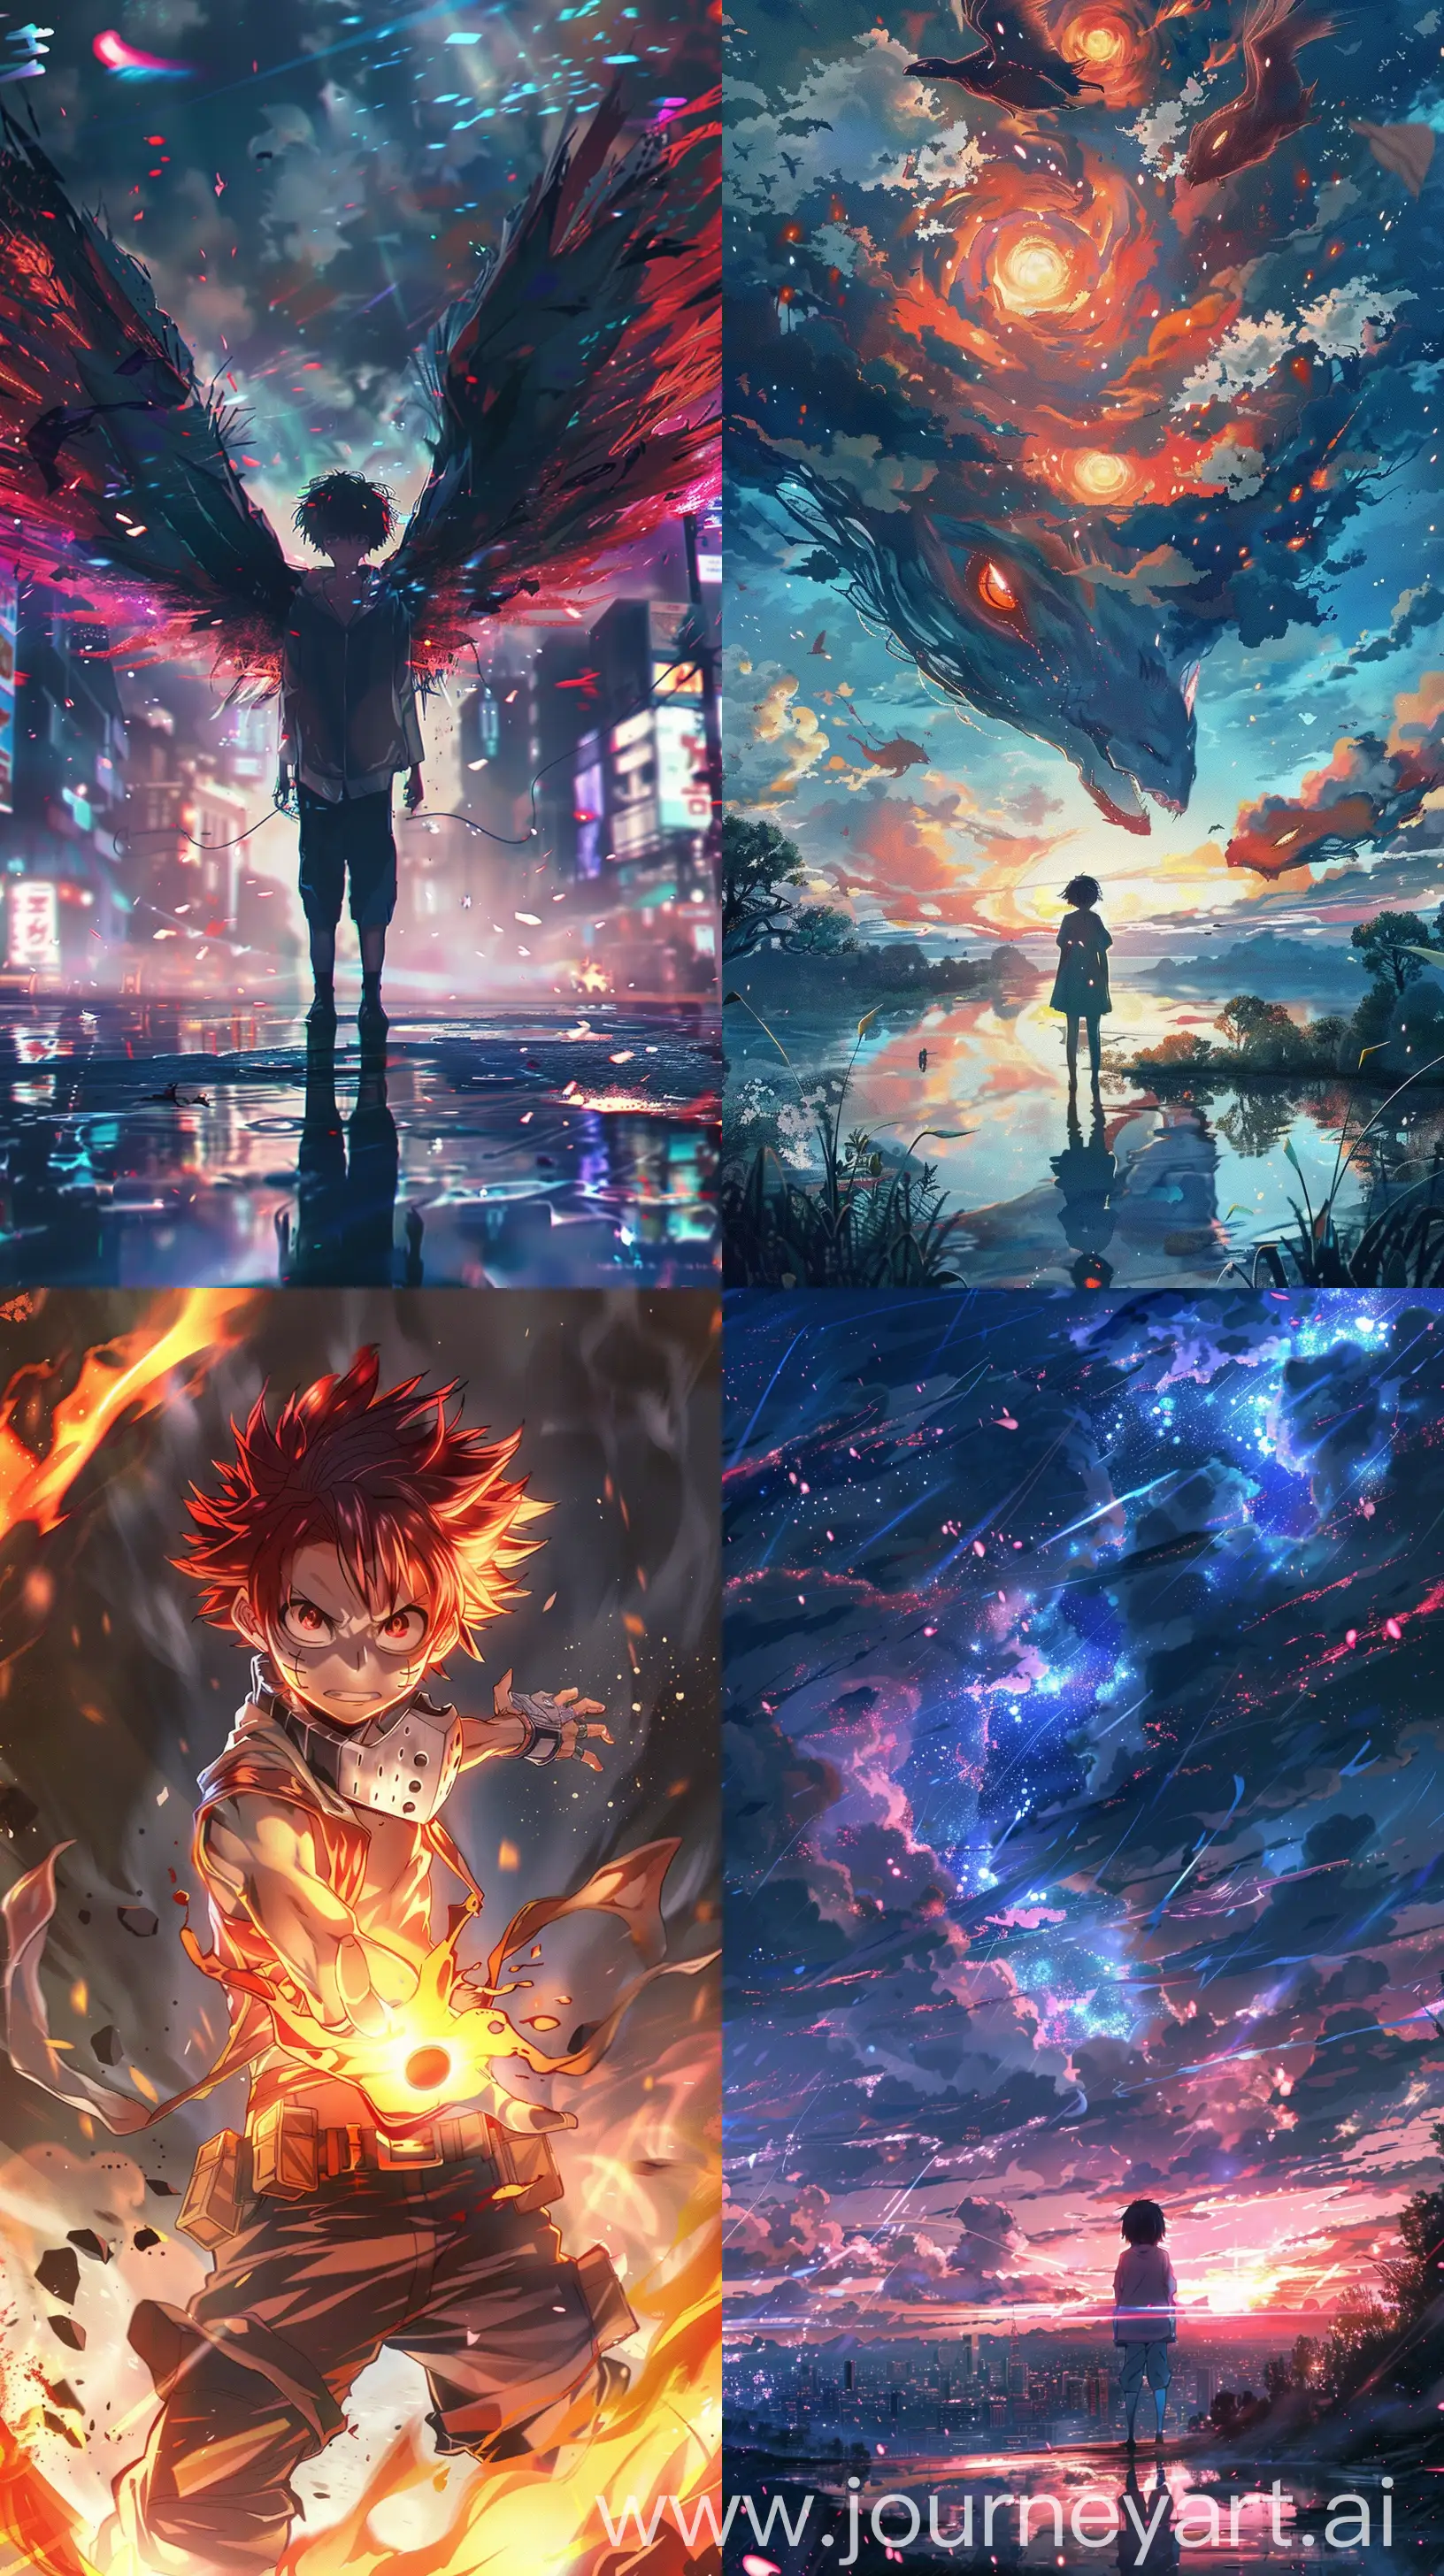 Todoroki-Shoto-Embraces-Fire-and-Ice-Powers-in-Heroic-Triumph